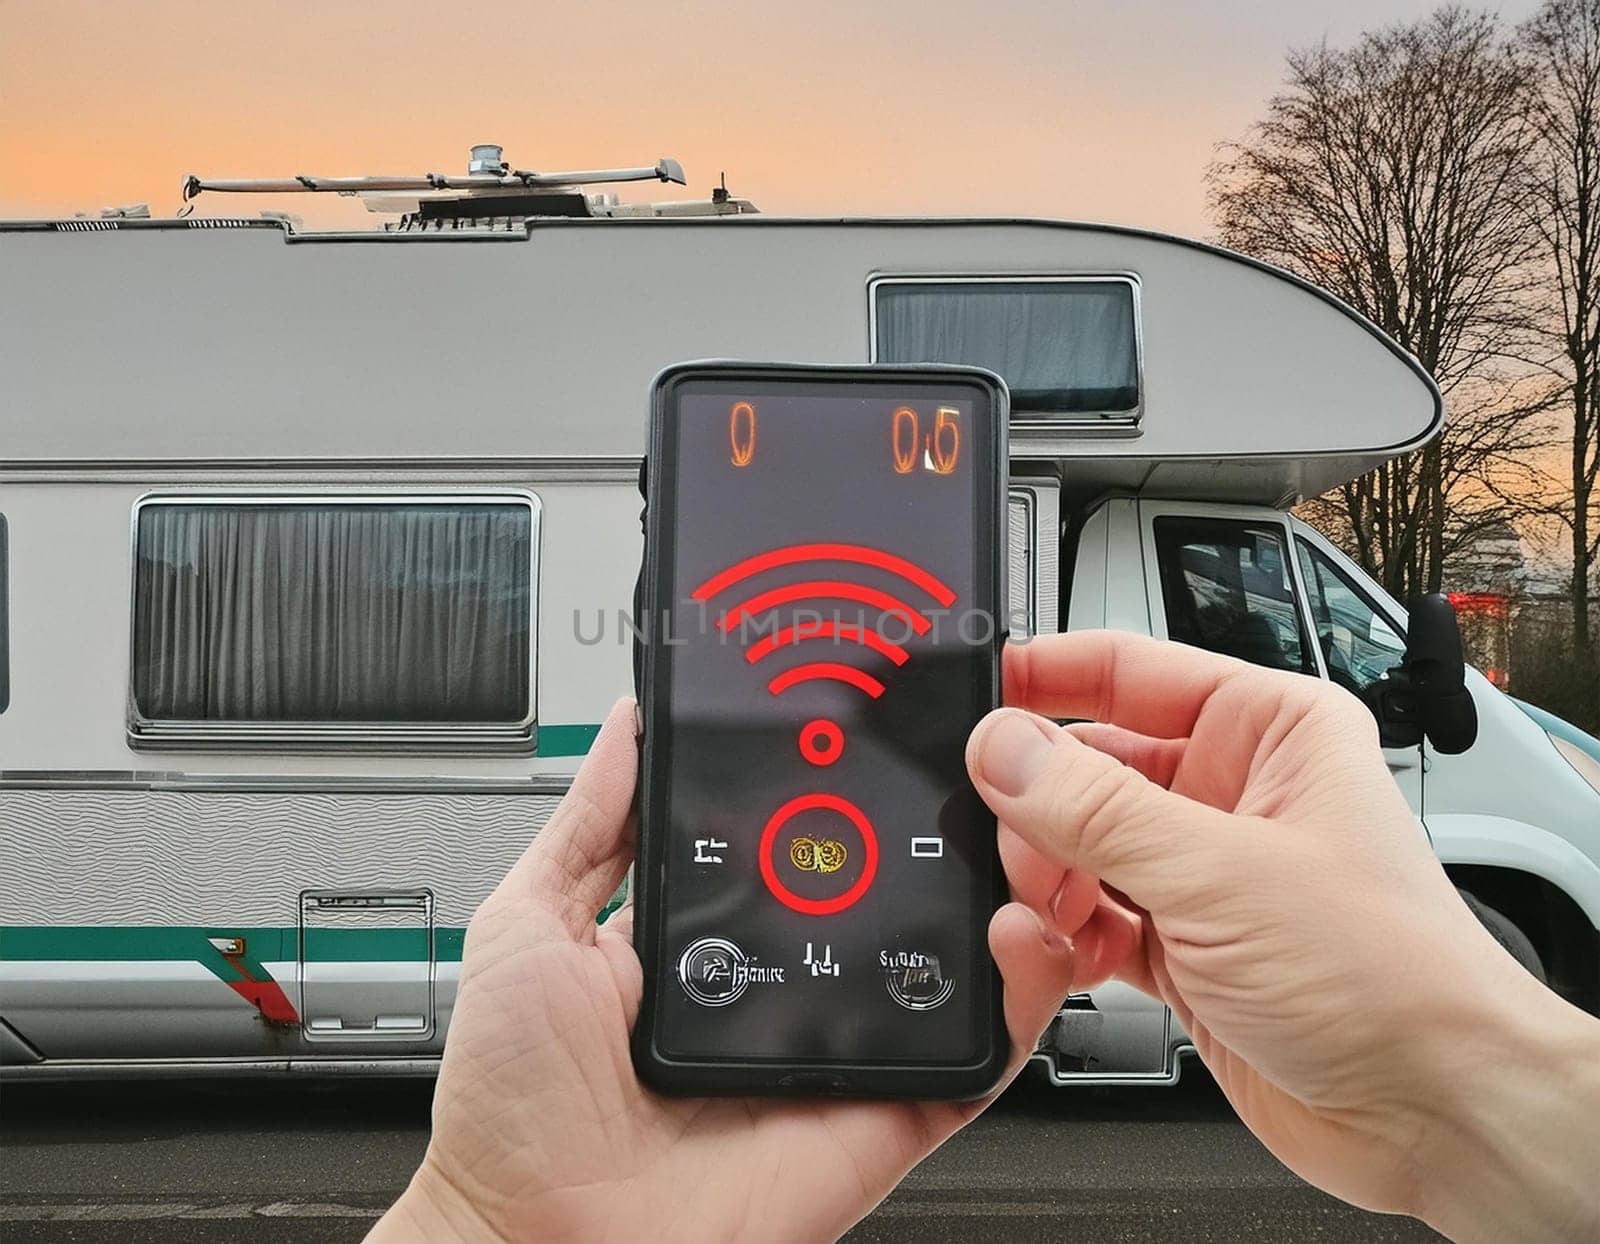 Car alarm system for motorhomes. Car security system. Security lock concept.